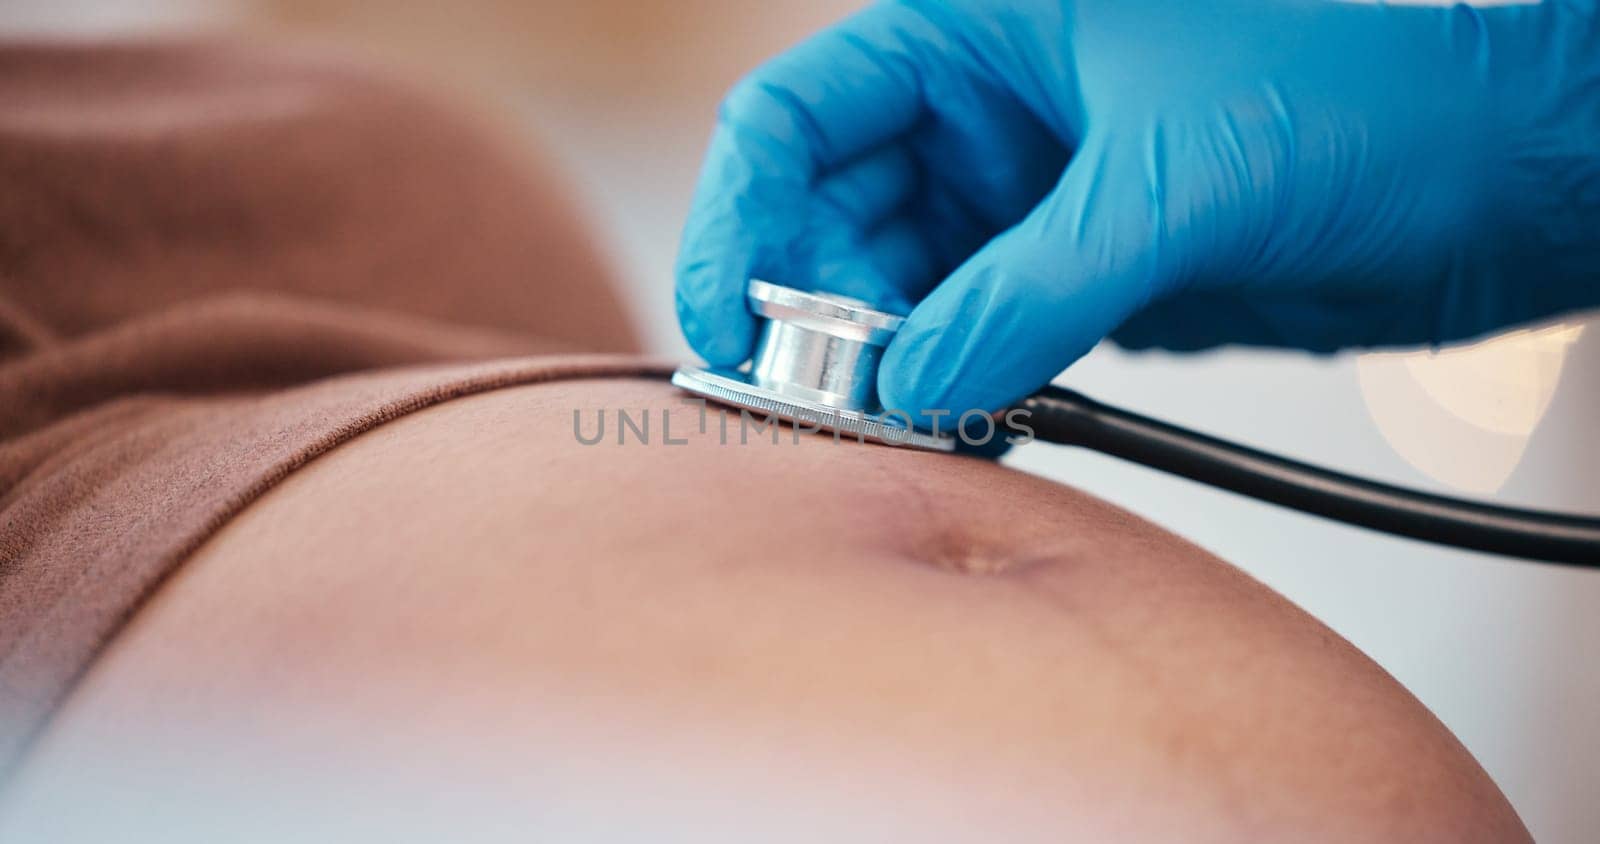 Healthcare, pregnancy and doctor with stethoscope on stomach for health check up of baby in utero. Pregnant black woman, doctors office and medical worker checking heart beat of child at hospital